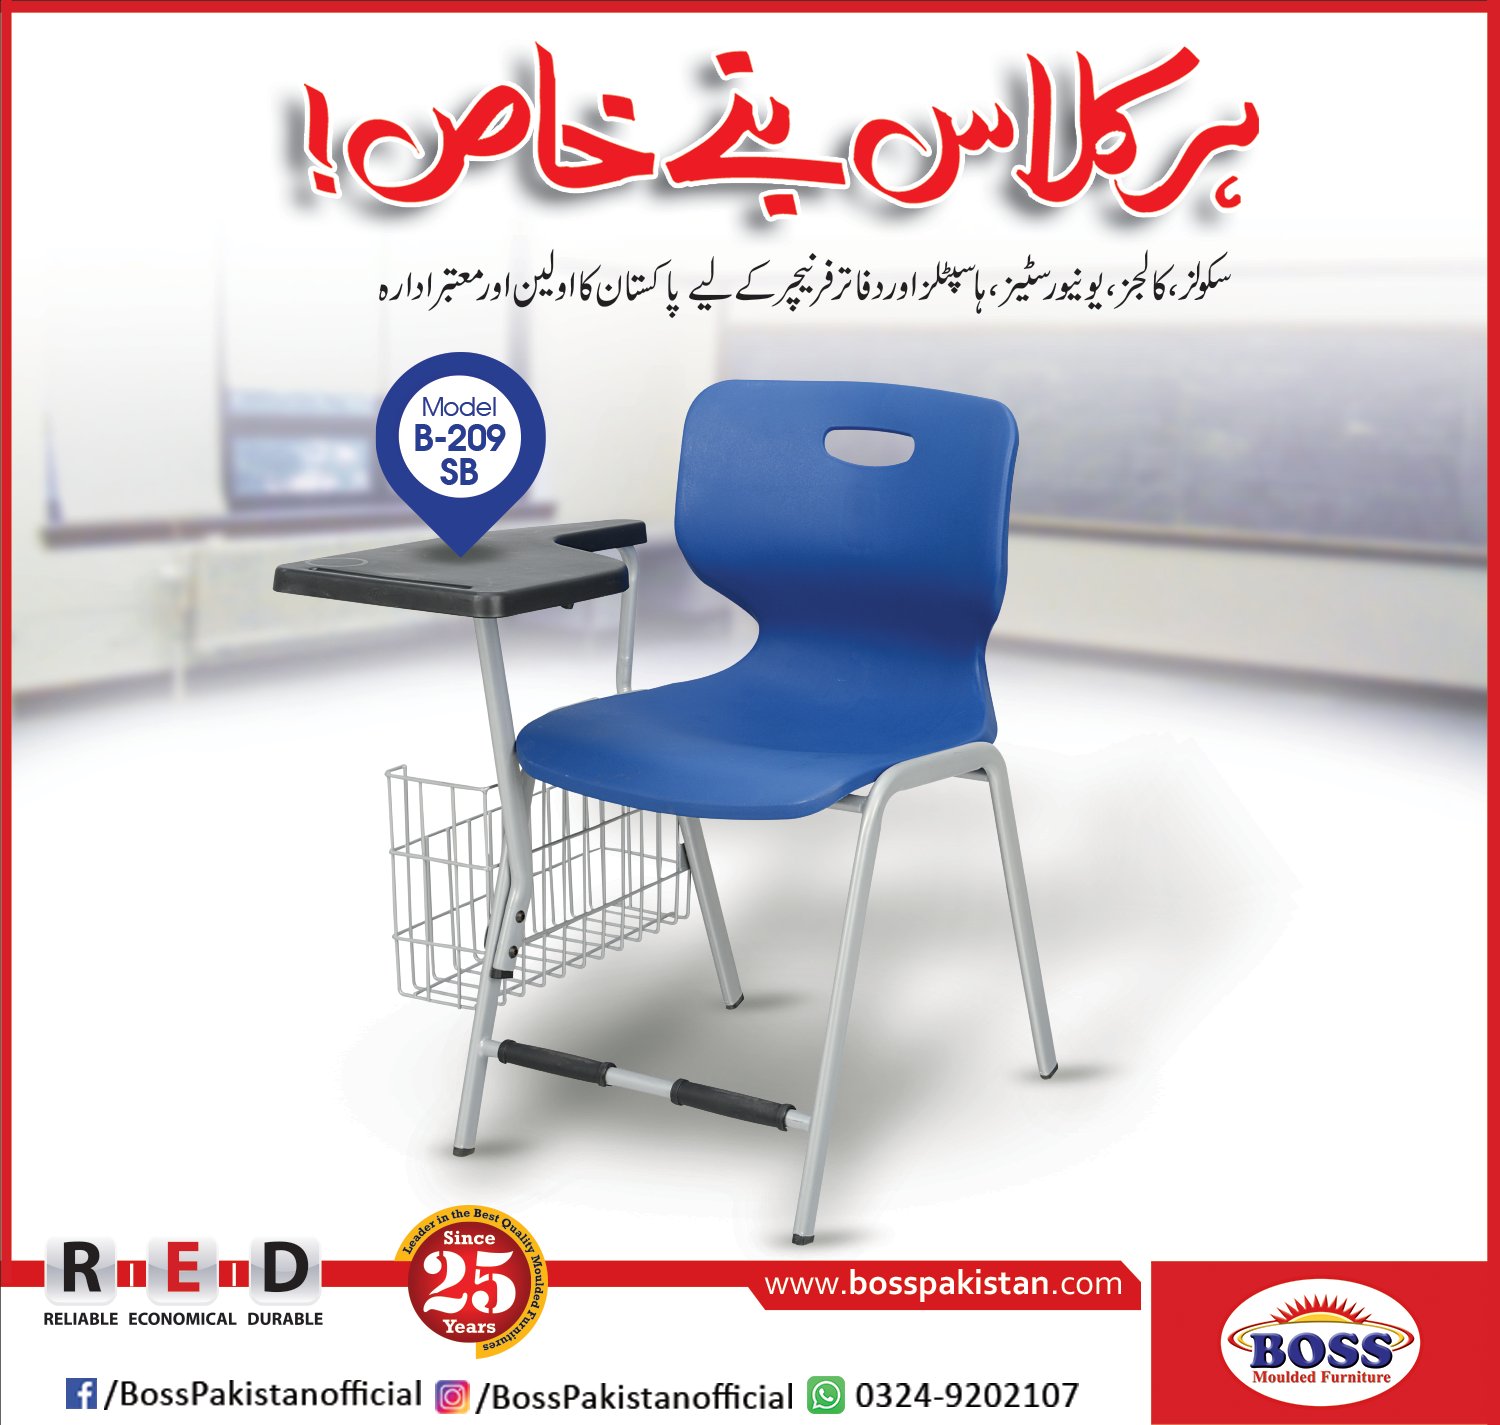 Boss Pakistan on Twitter: "Time to Go Back to School Now! Find our new academic range more stronger and long lasting. You can find new study chairs, study desks, joint study